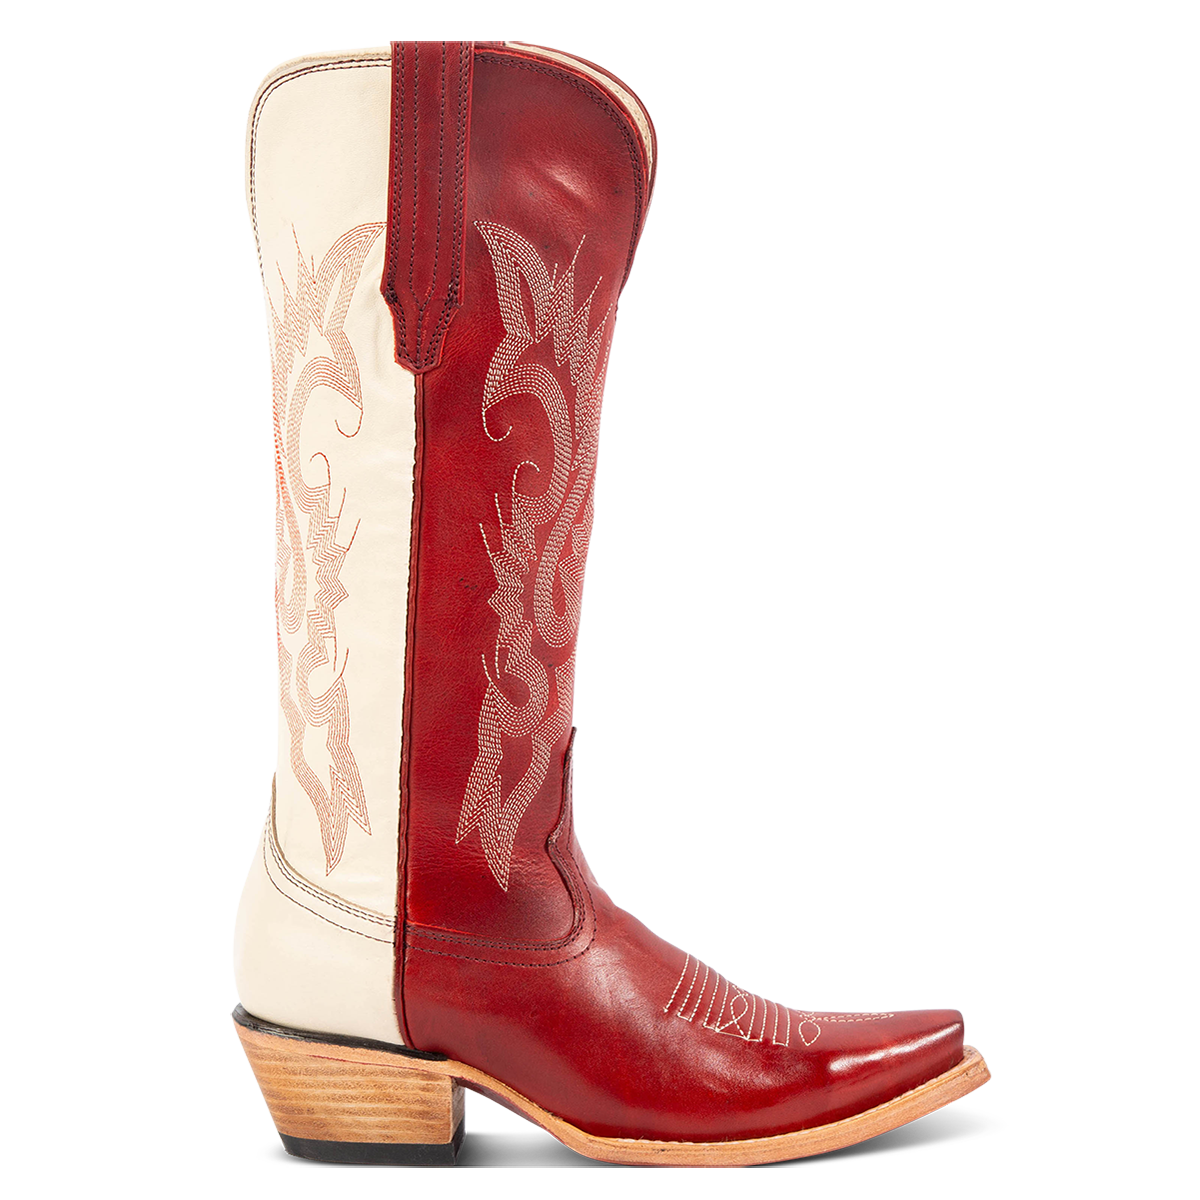 FREEBIRD women's Woodland red multi cowboy boot with stitch detailing and snip toe construction